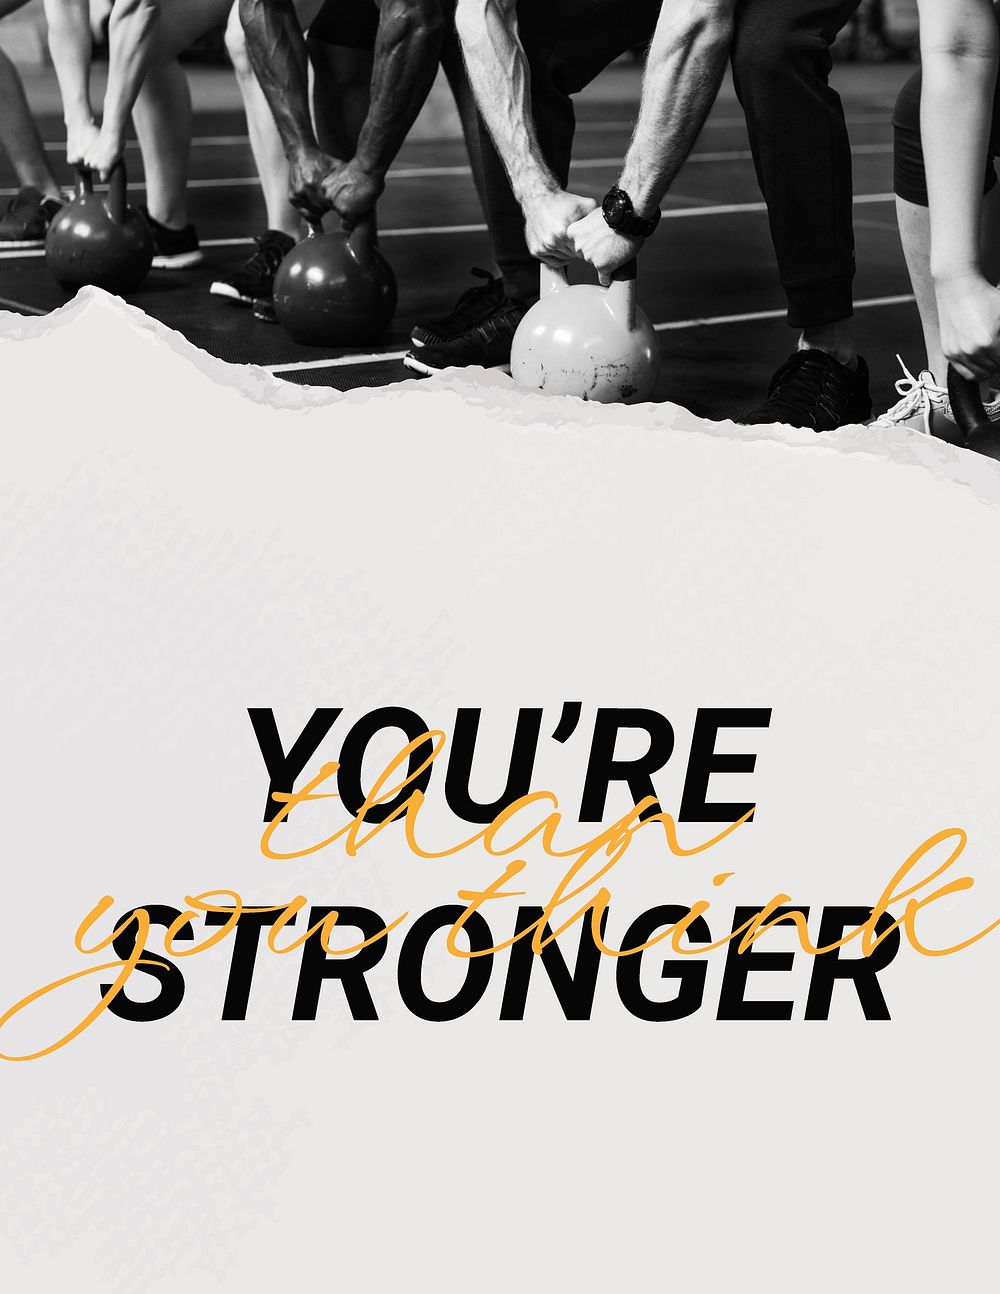 You're stronger flyer template, inspirational sports quote vector